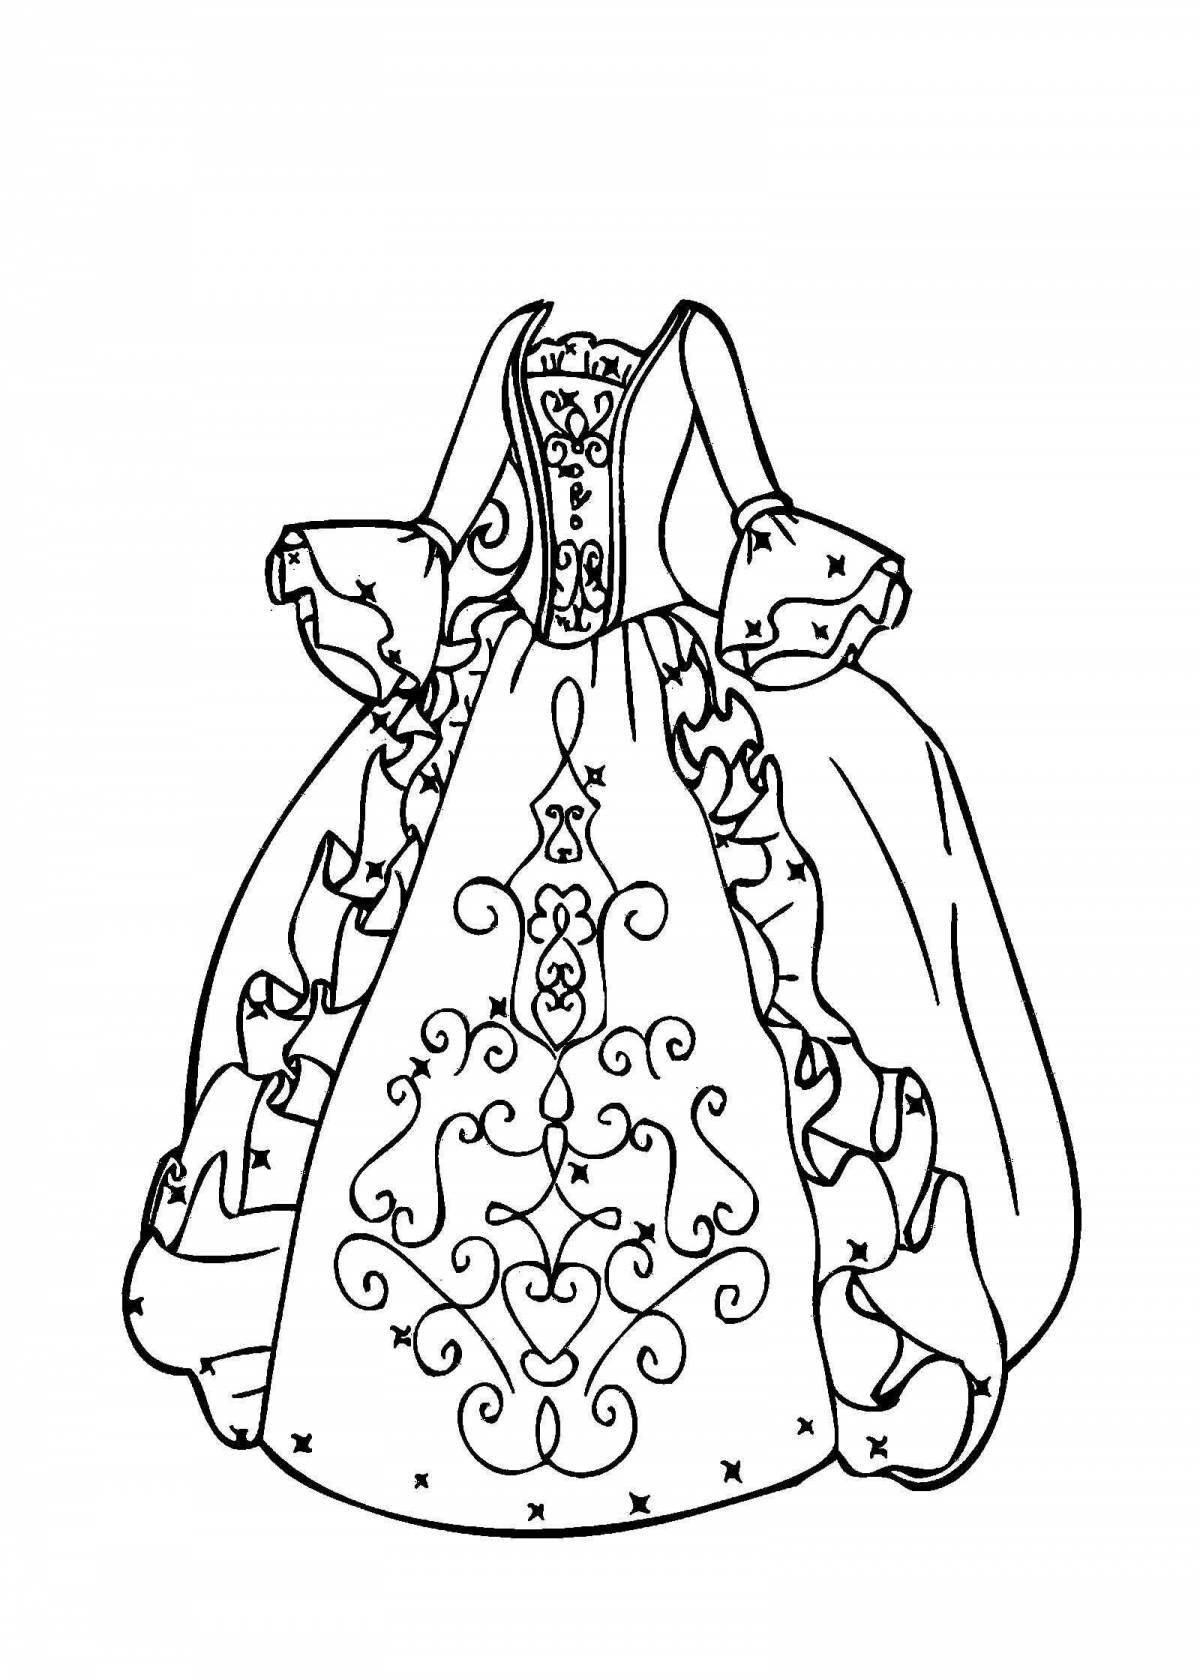 Ornate dress coloring page for 5-6 year olds